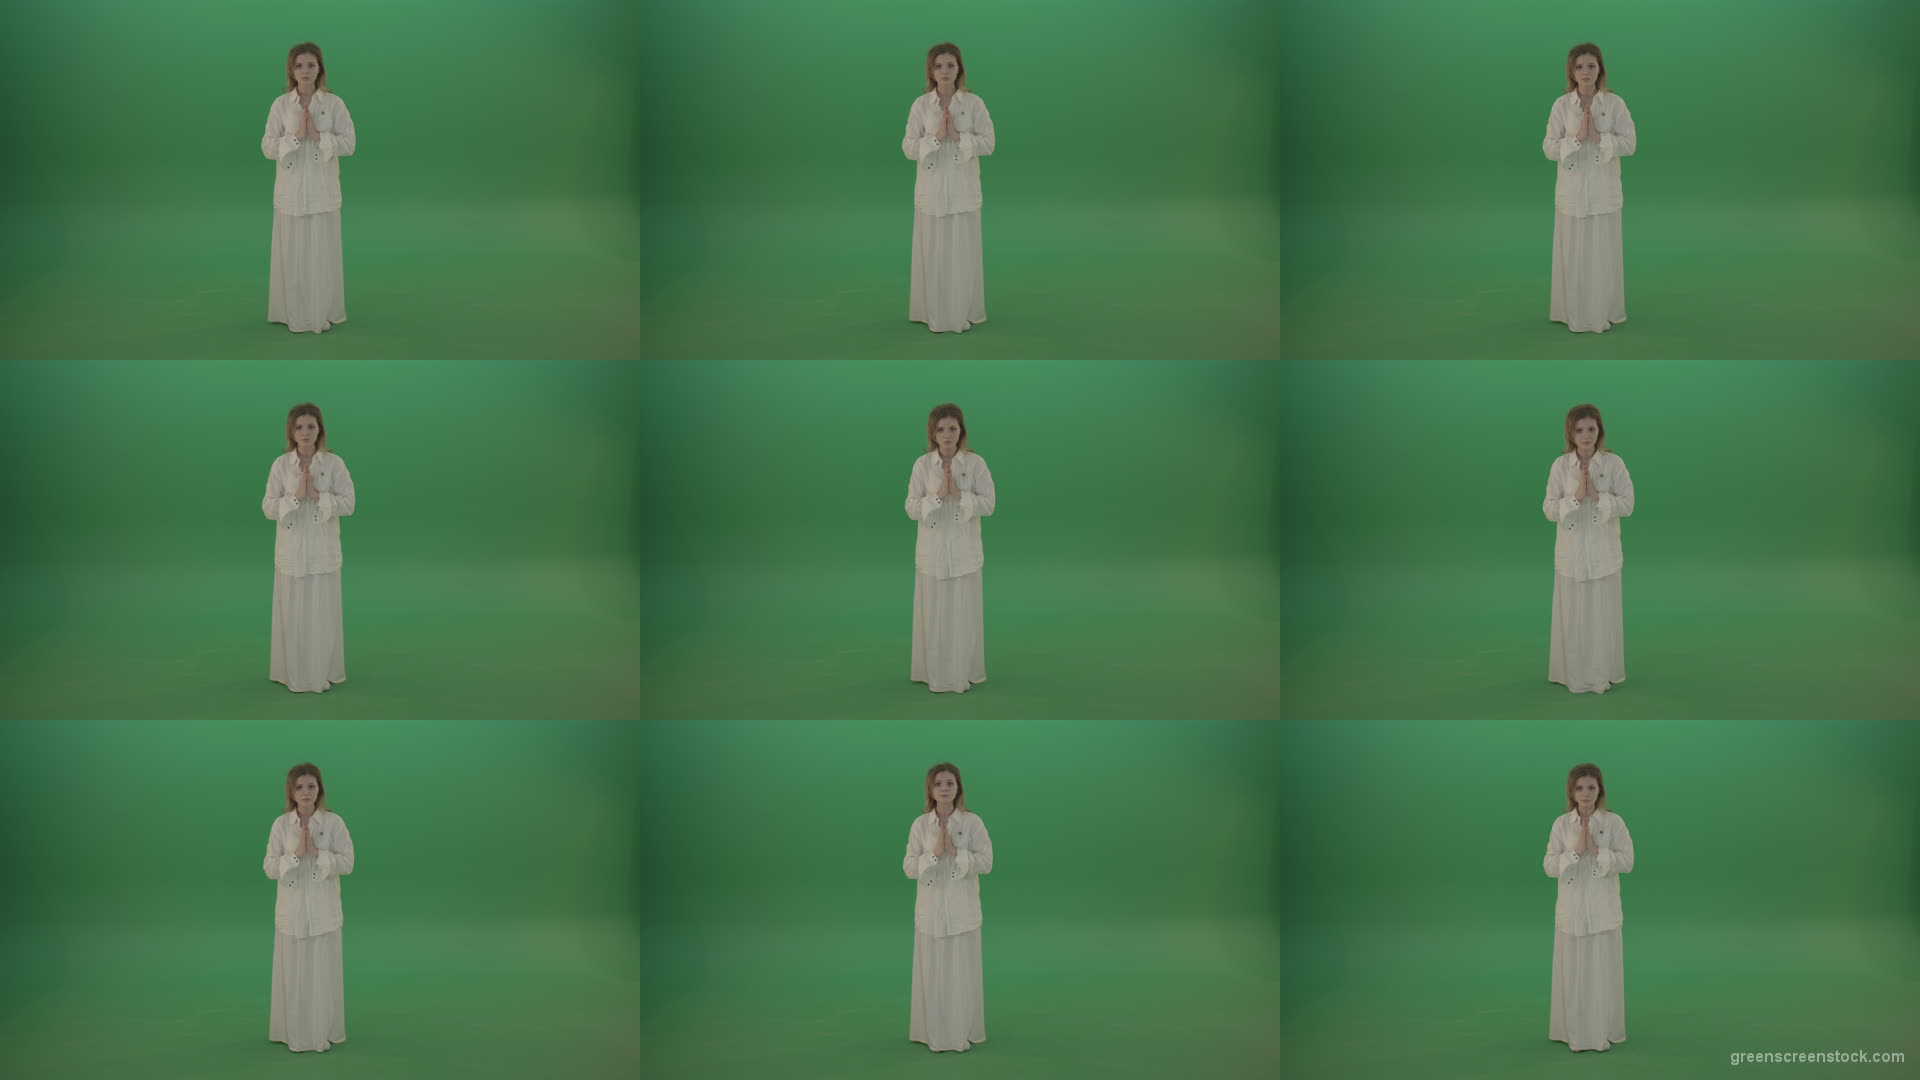 Girl-wearing-a-white-suit-pray-to-god-isolated-on-green-background Green Screen Stock